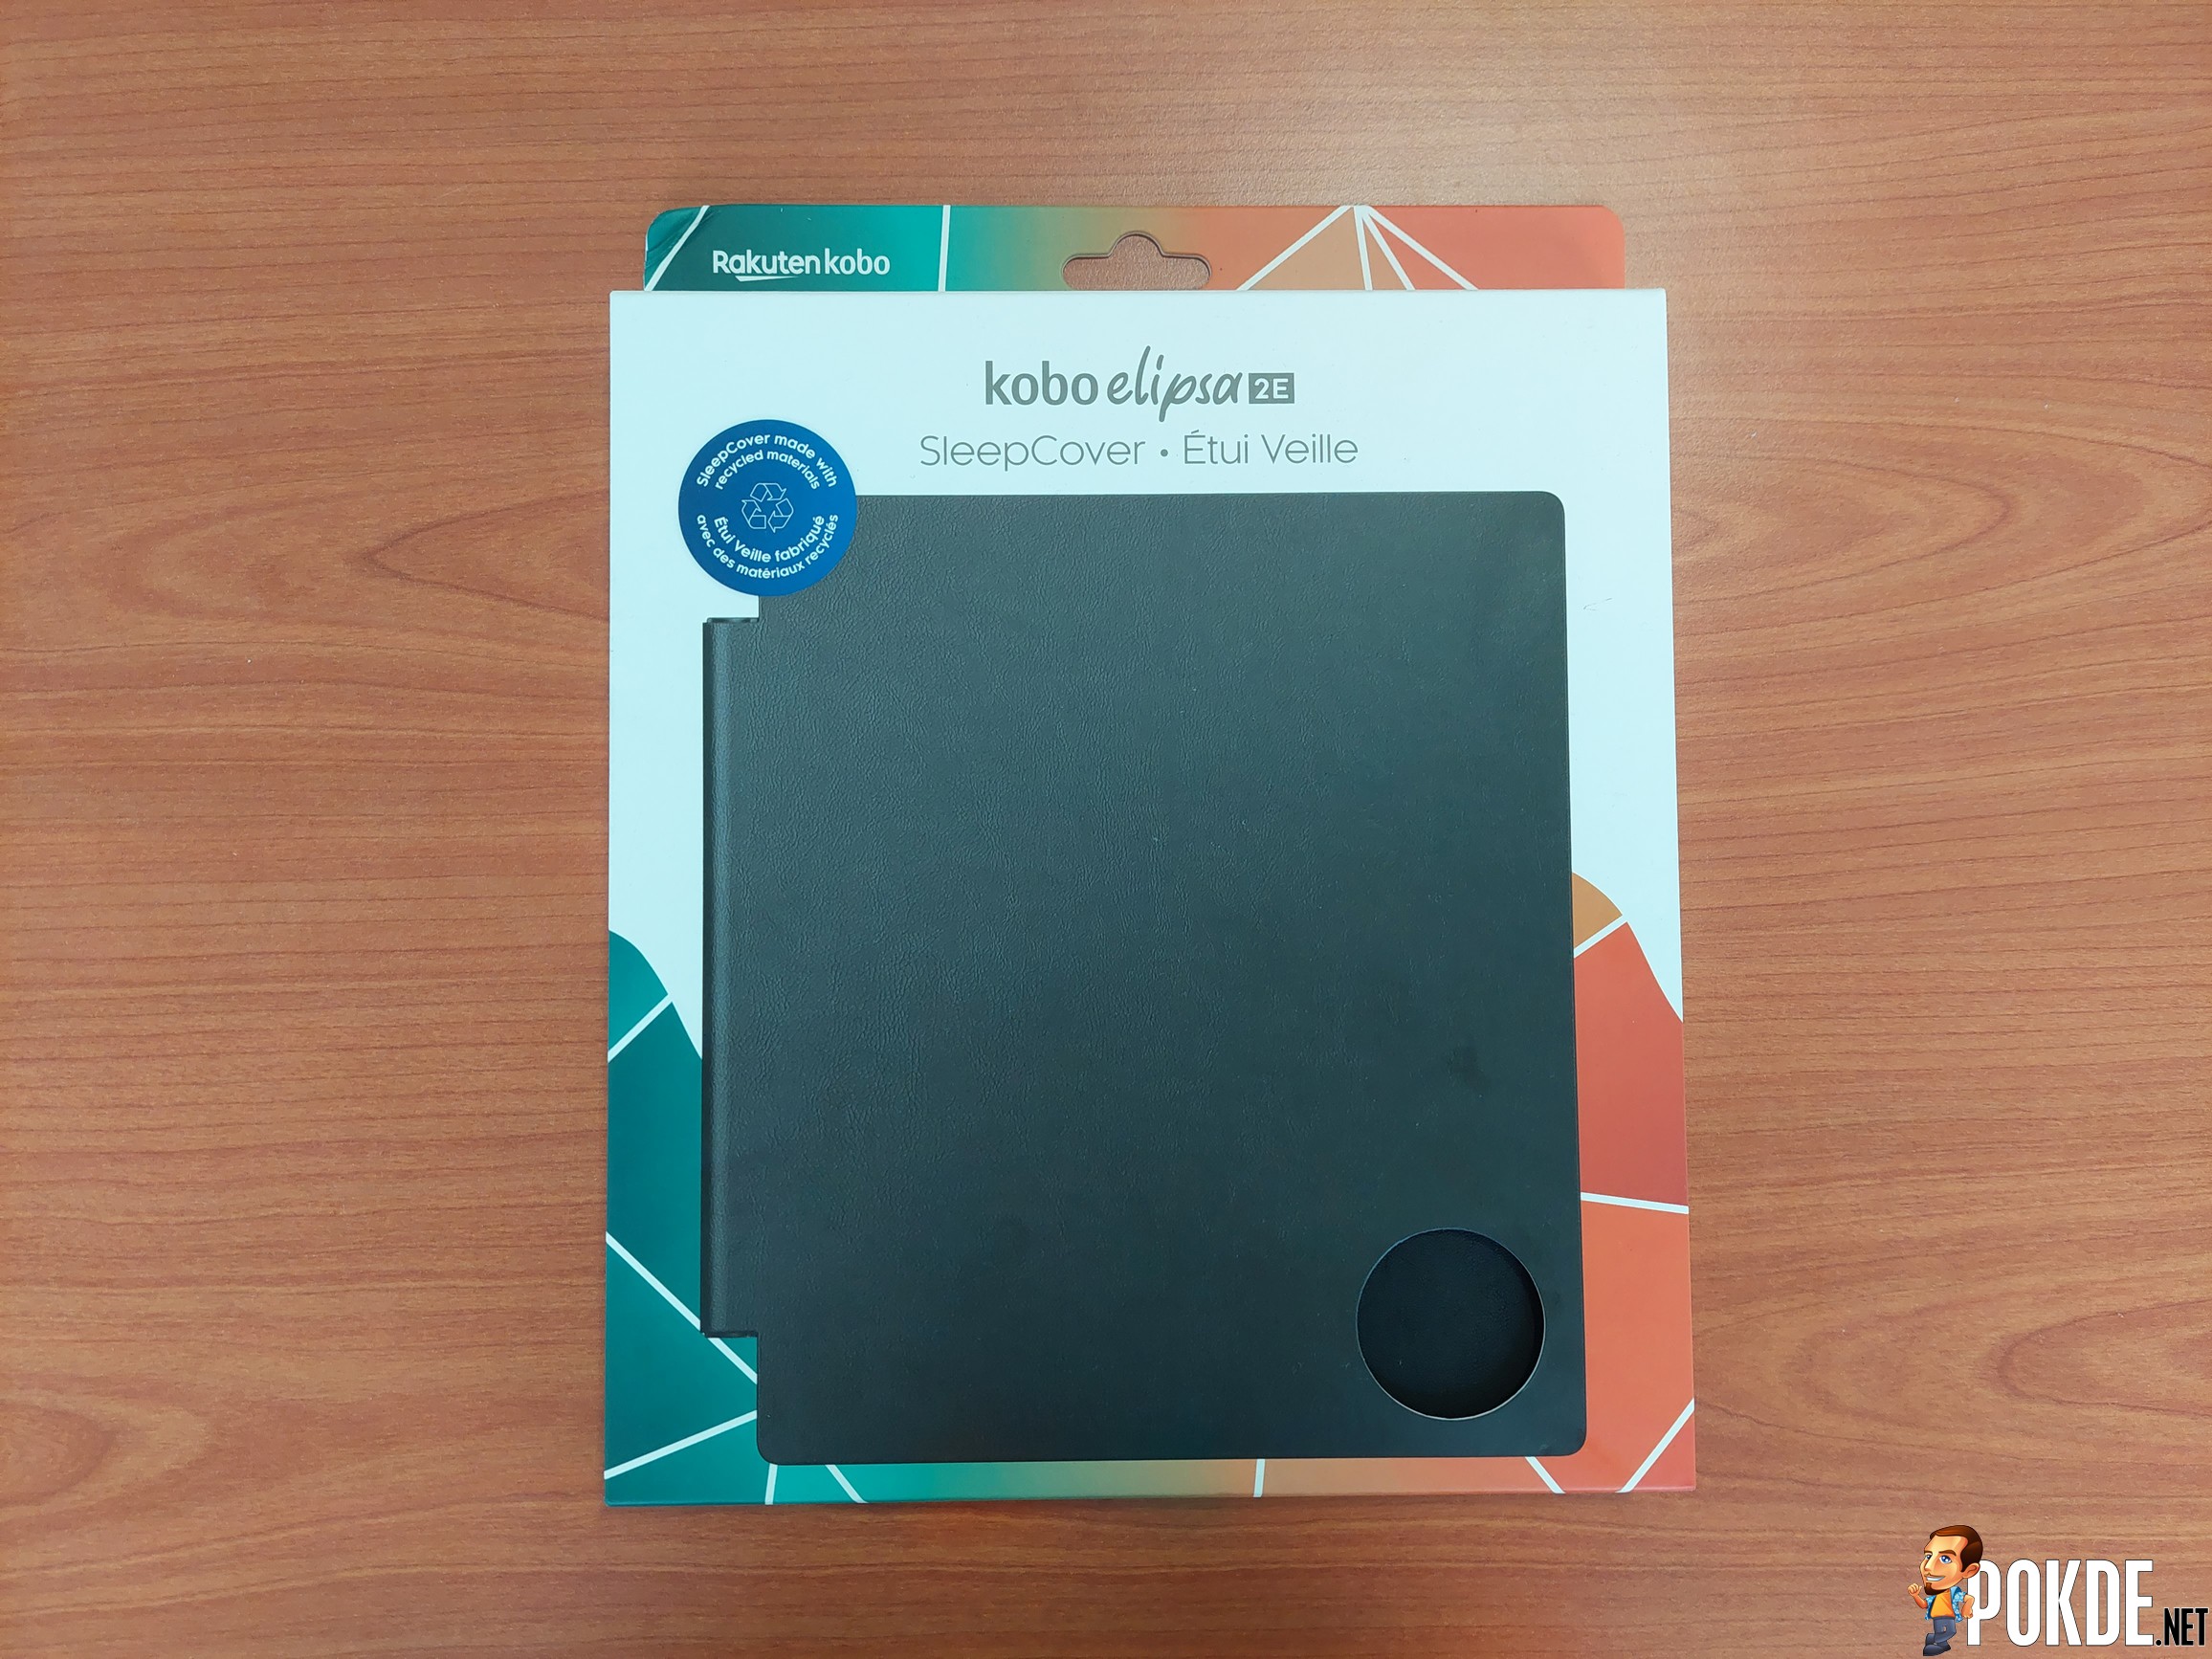 Kobo Elipsa 2E REVIEW: Well designed with minor issues 